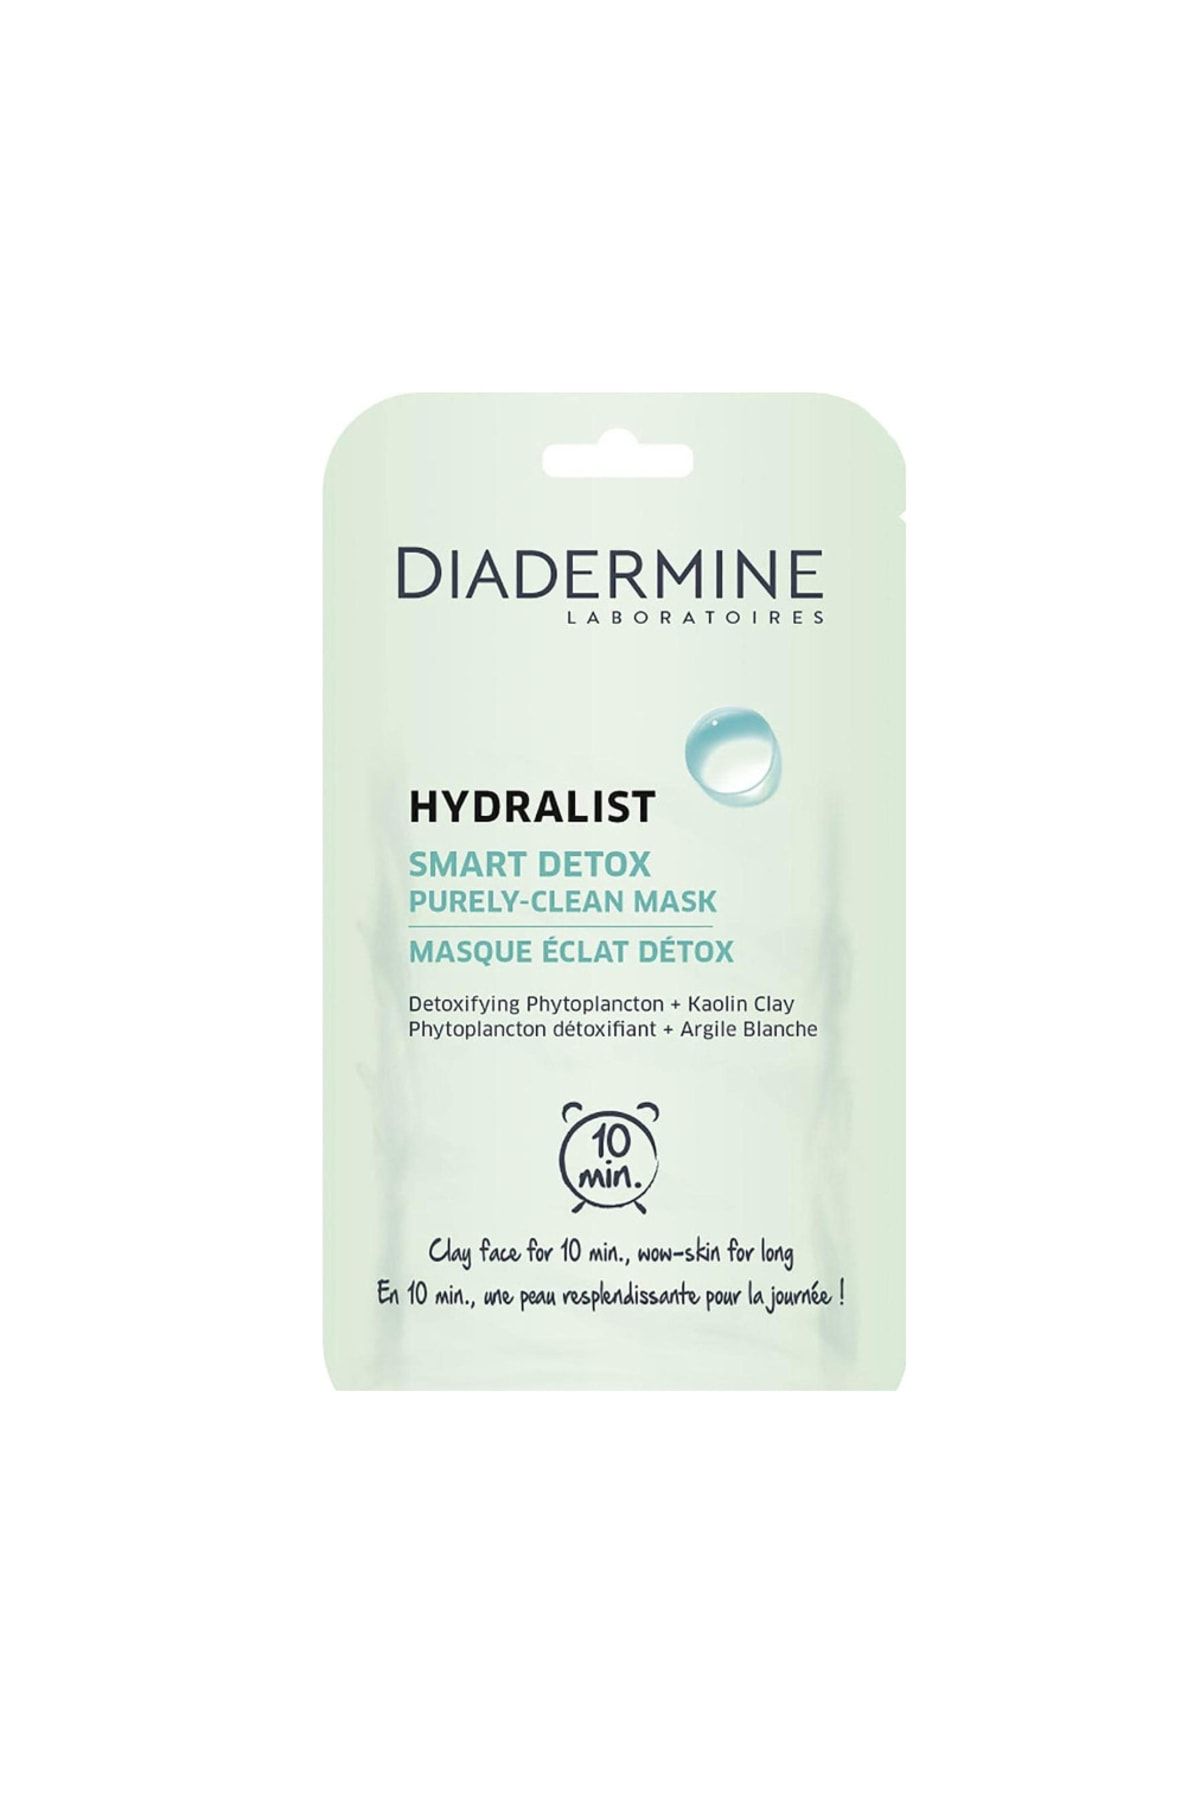 Diadermine Hydralist Smoothing Refreshing Detox Purifying Plankton Extract Face Masque 8 Ml